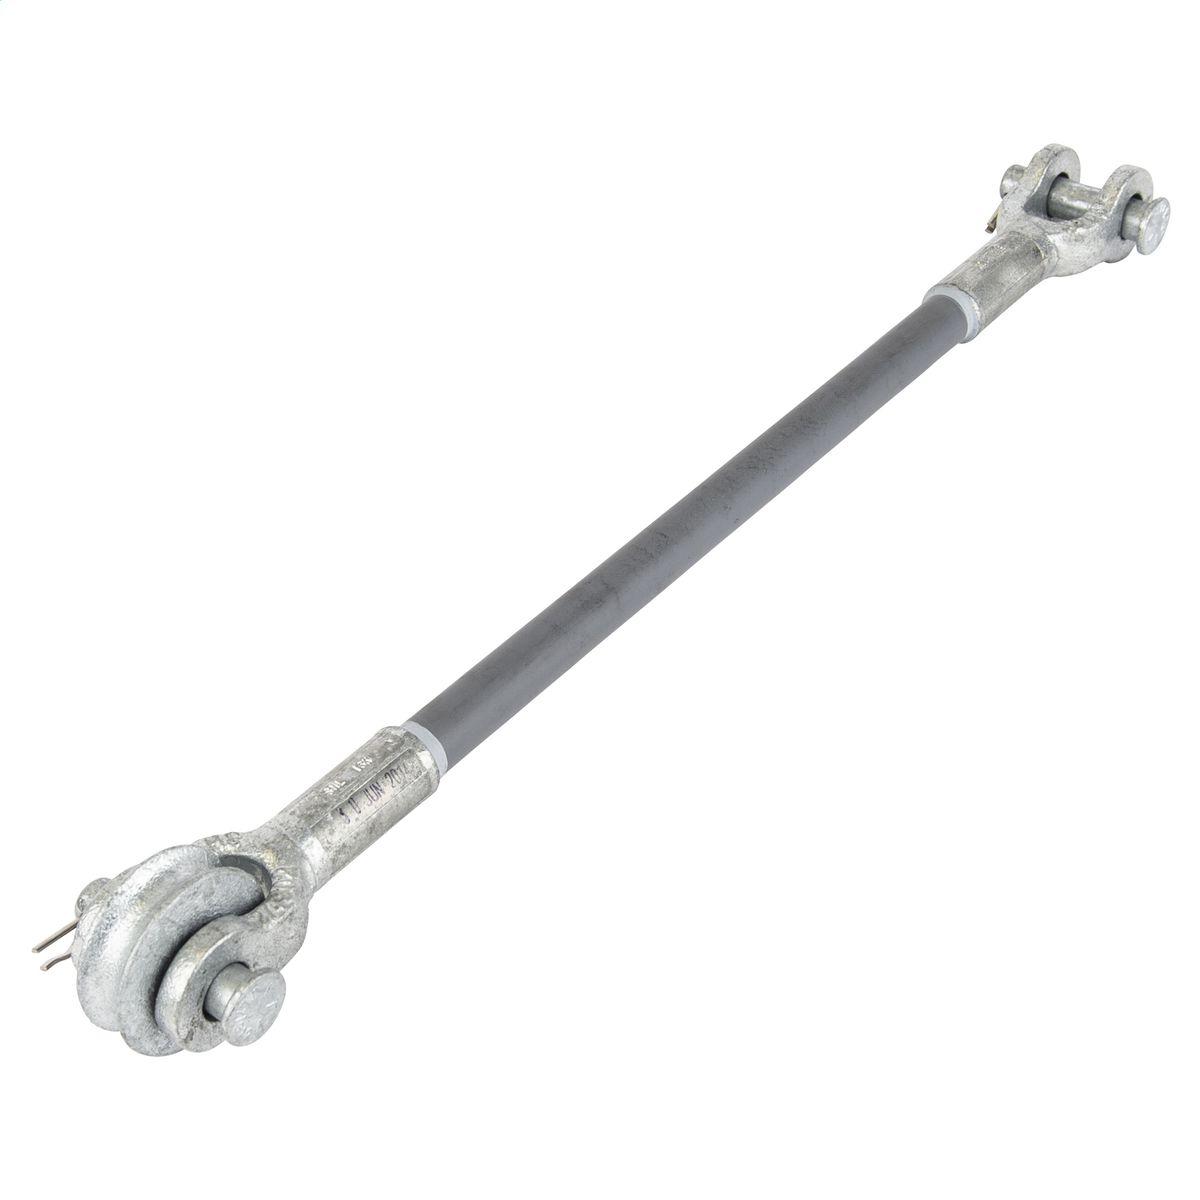 Hubbell GS36096CC1SC 96" Silicone Coated Fiberglass Guy Strain; 36,000 lb Series; Clevis / Clevis + 1 Roller 